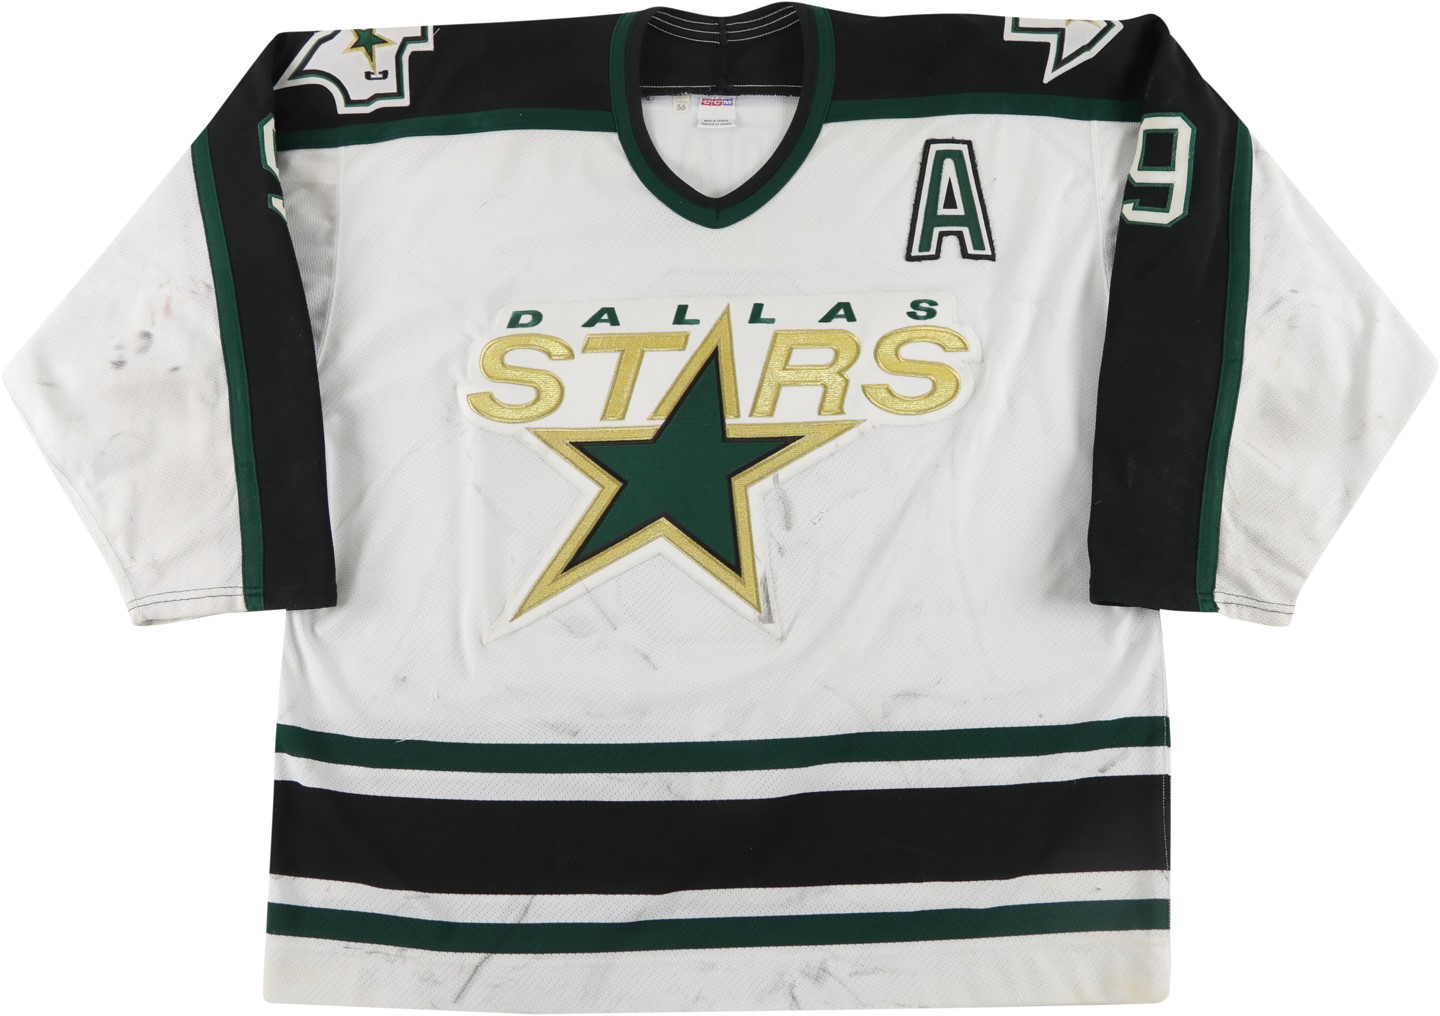 Hockey - 1998-99 Mike Modano Dallas Stars "Stanley Cup Collection" Game Worn Jersey (Photo-Matched)